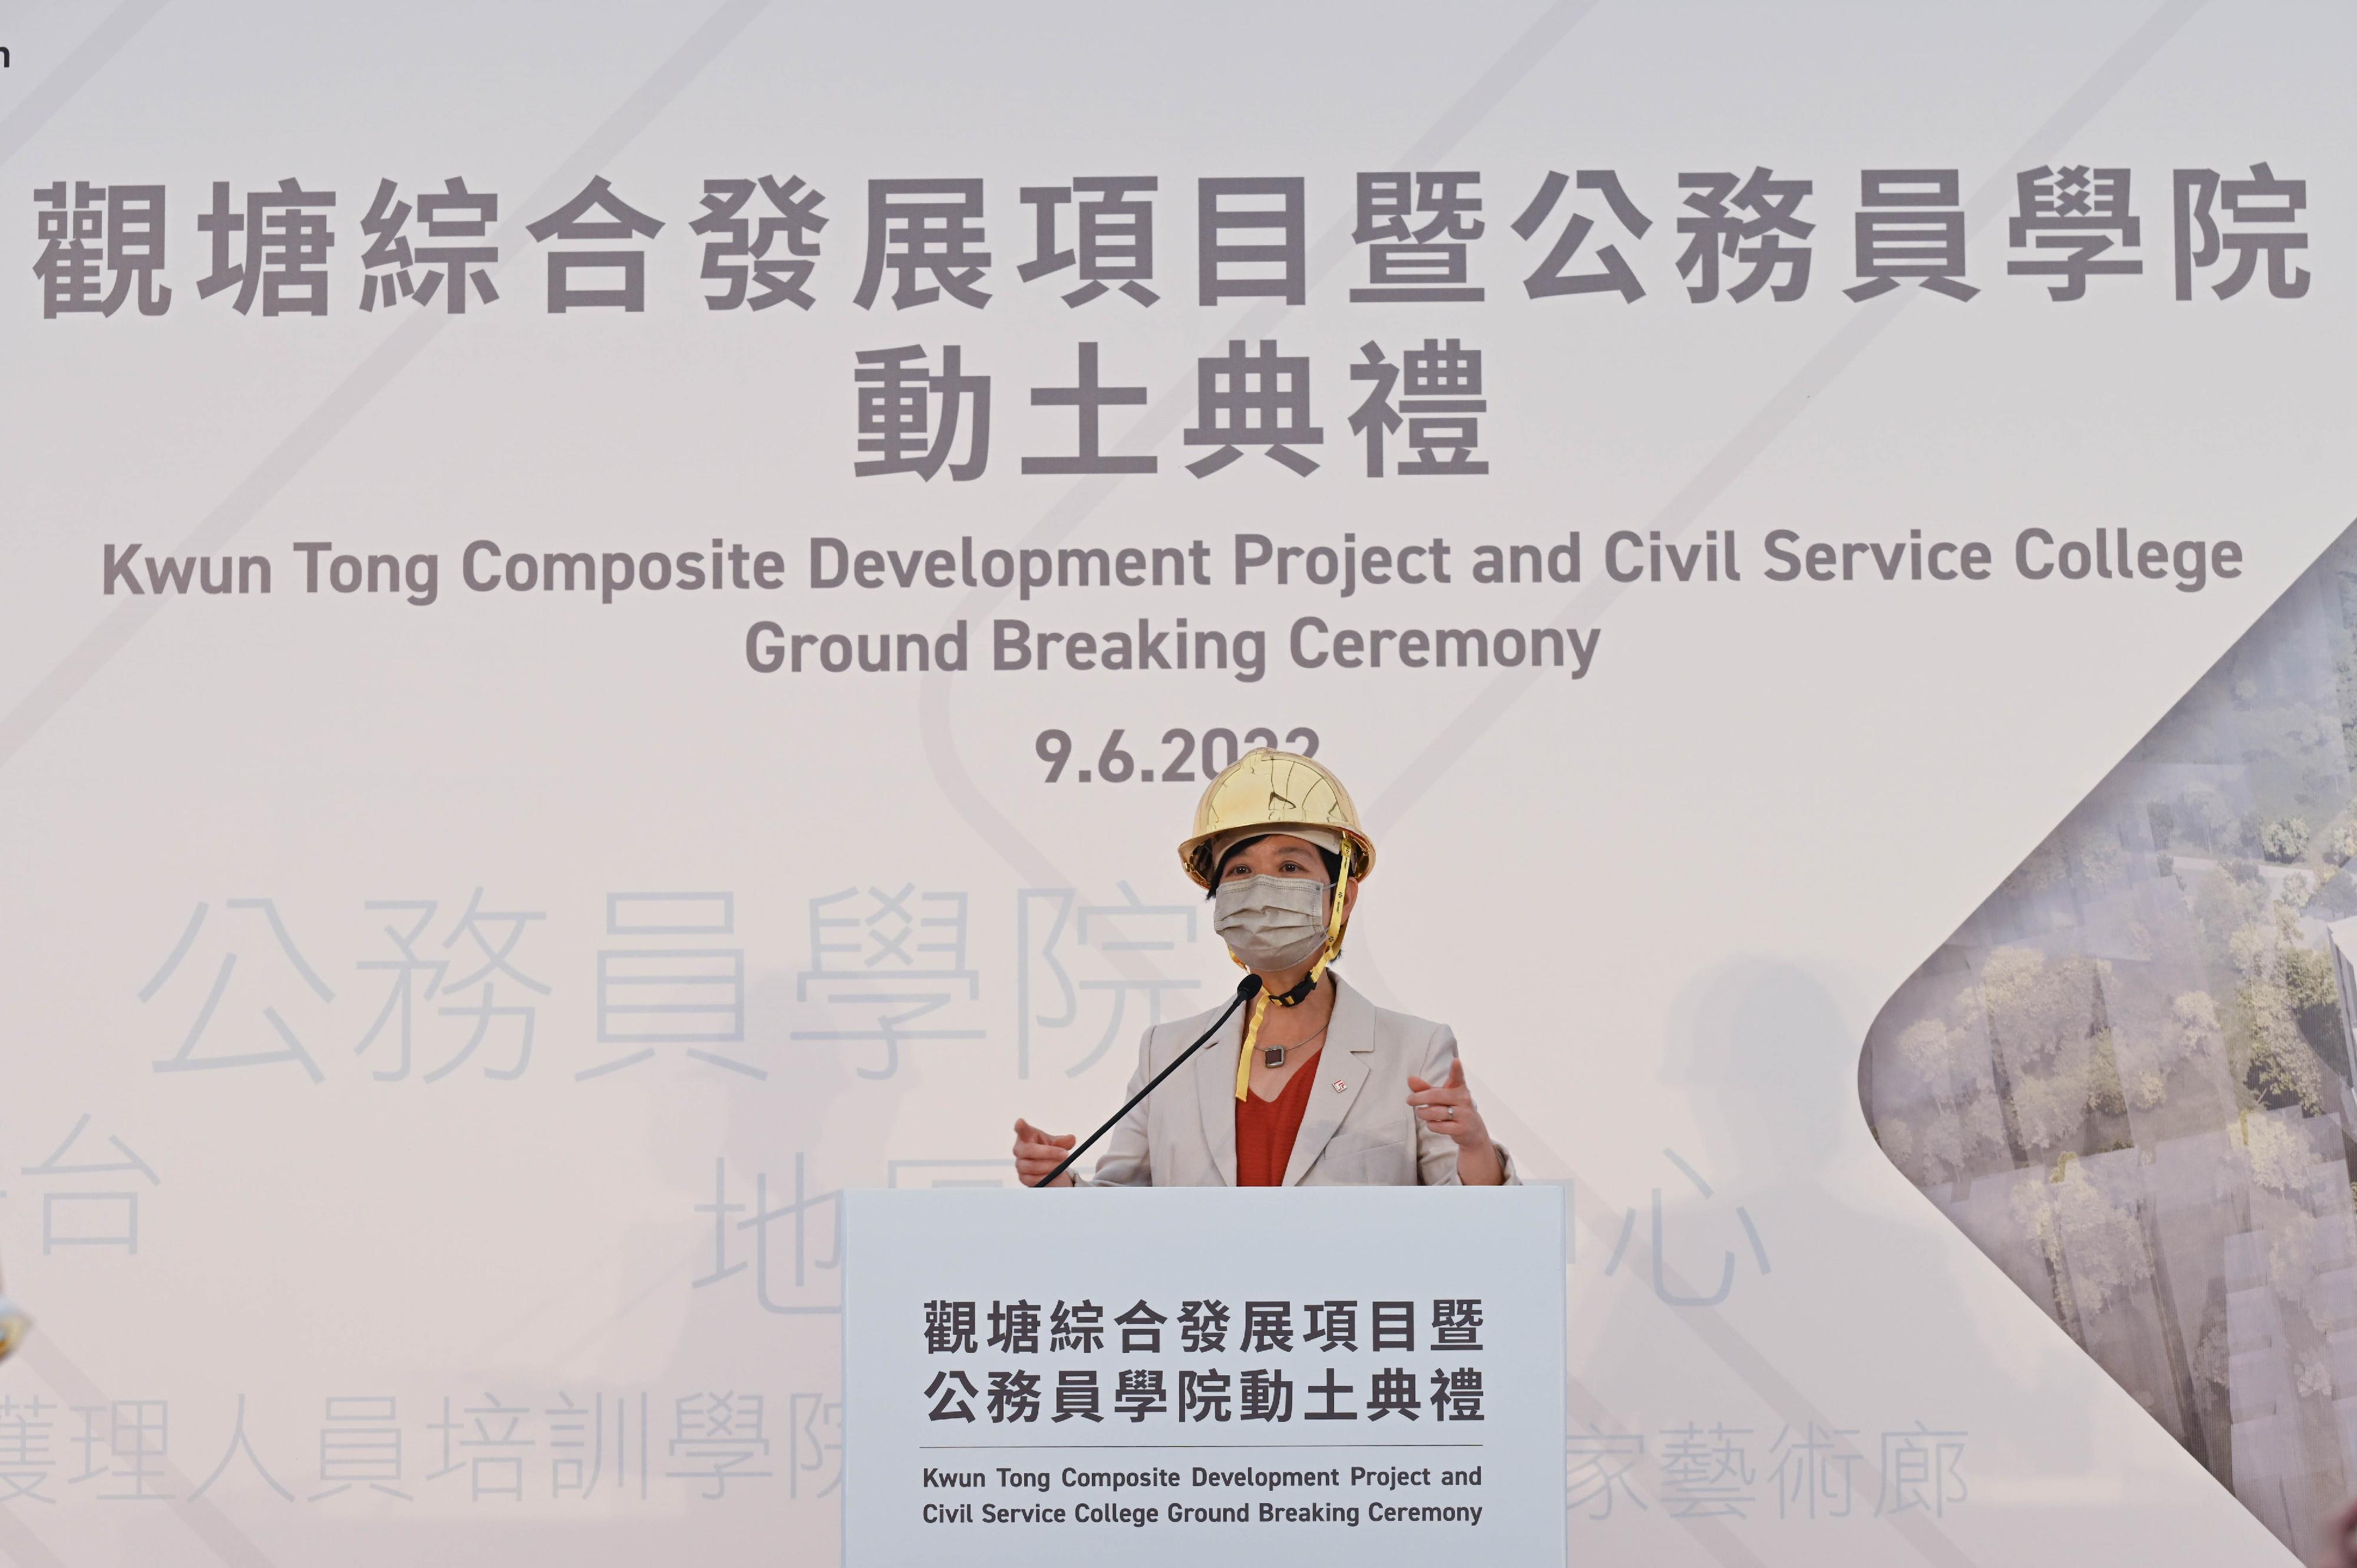 The ground breaking ceremony of the Kwun Tong Composite Development Project and Civil Service College took place today (June 9) to mark the launch of the construction project. Photo shows the Director of Architectural Services, Ms Winnie Ho, delivering a speech at the ceremony.